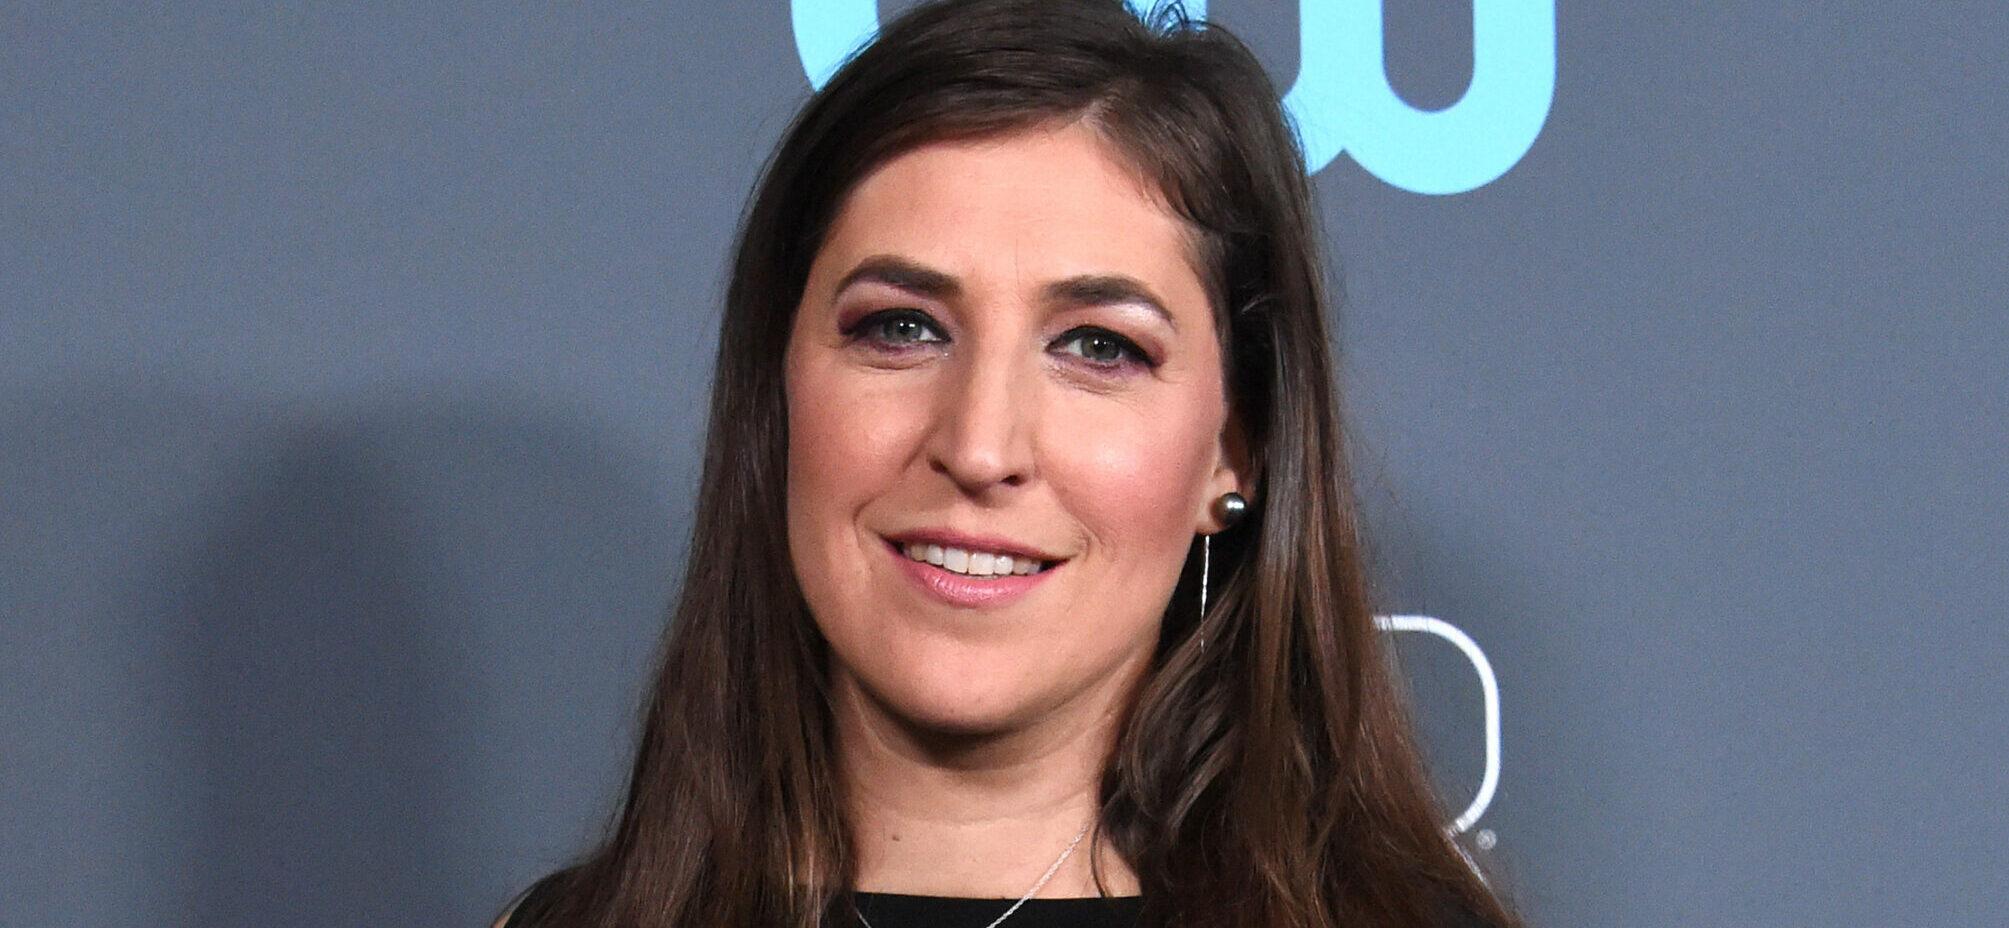 Former ‘Jeopardy!’ Champ Weighs In On Mayim Bialik’s Sudden Exit